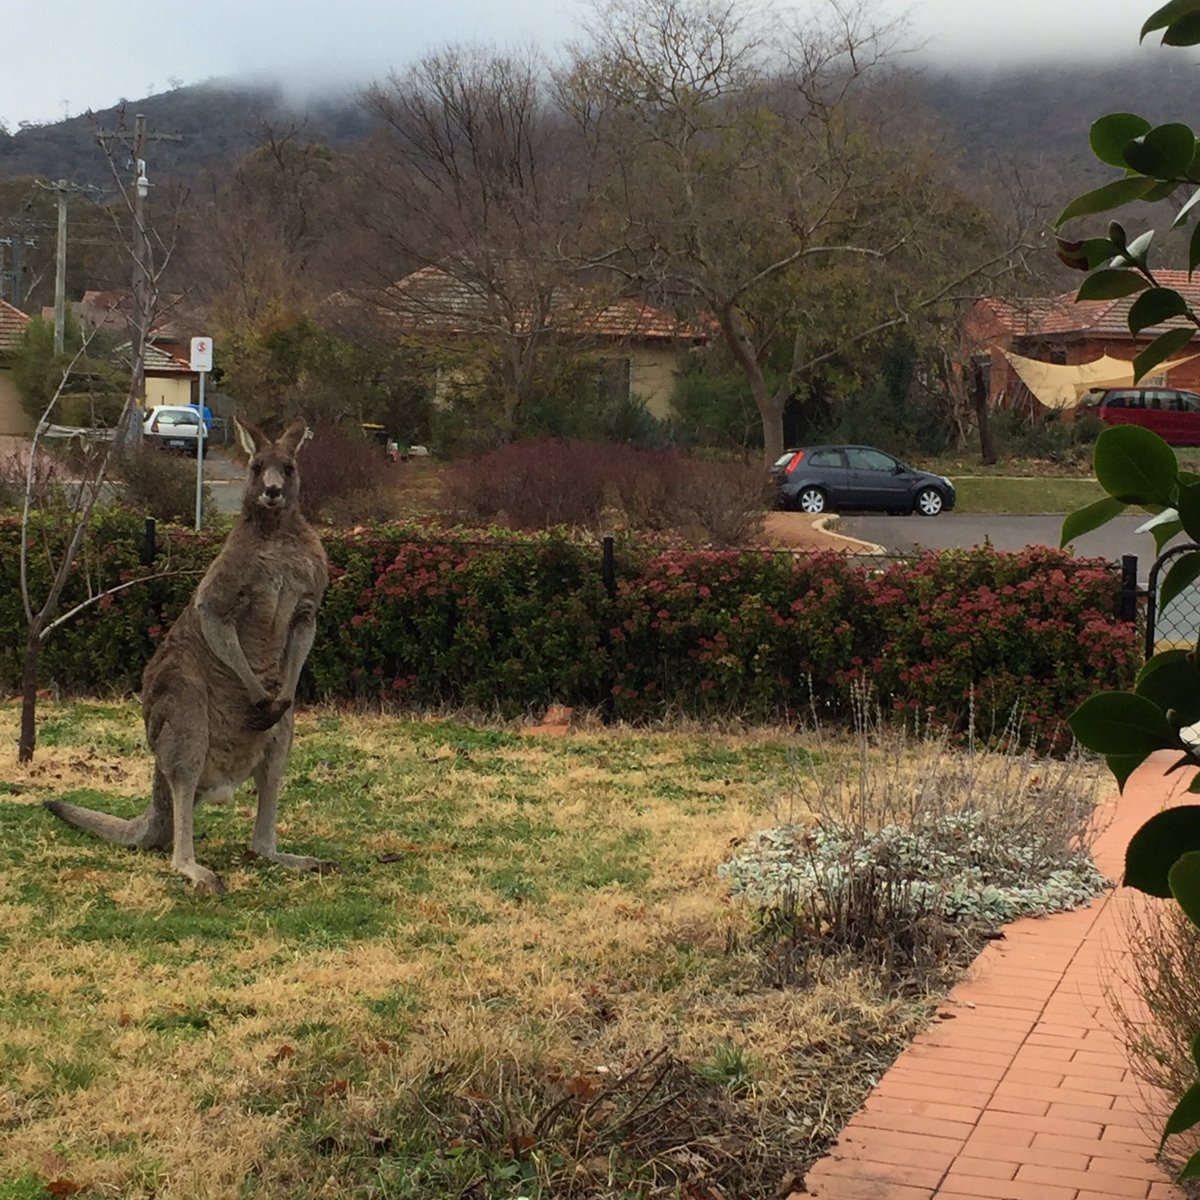 A bit excited when I opened my front door to meet this fellow eye-to-eye today - #absoluteunit @Canberra